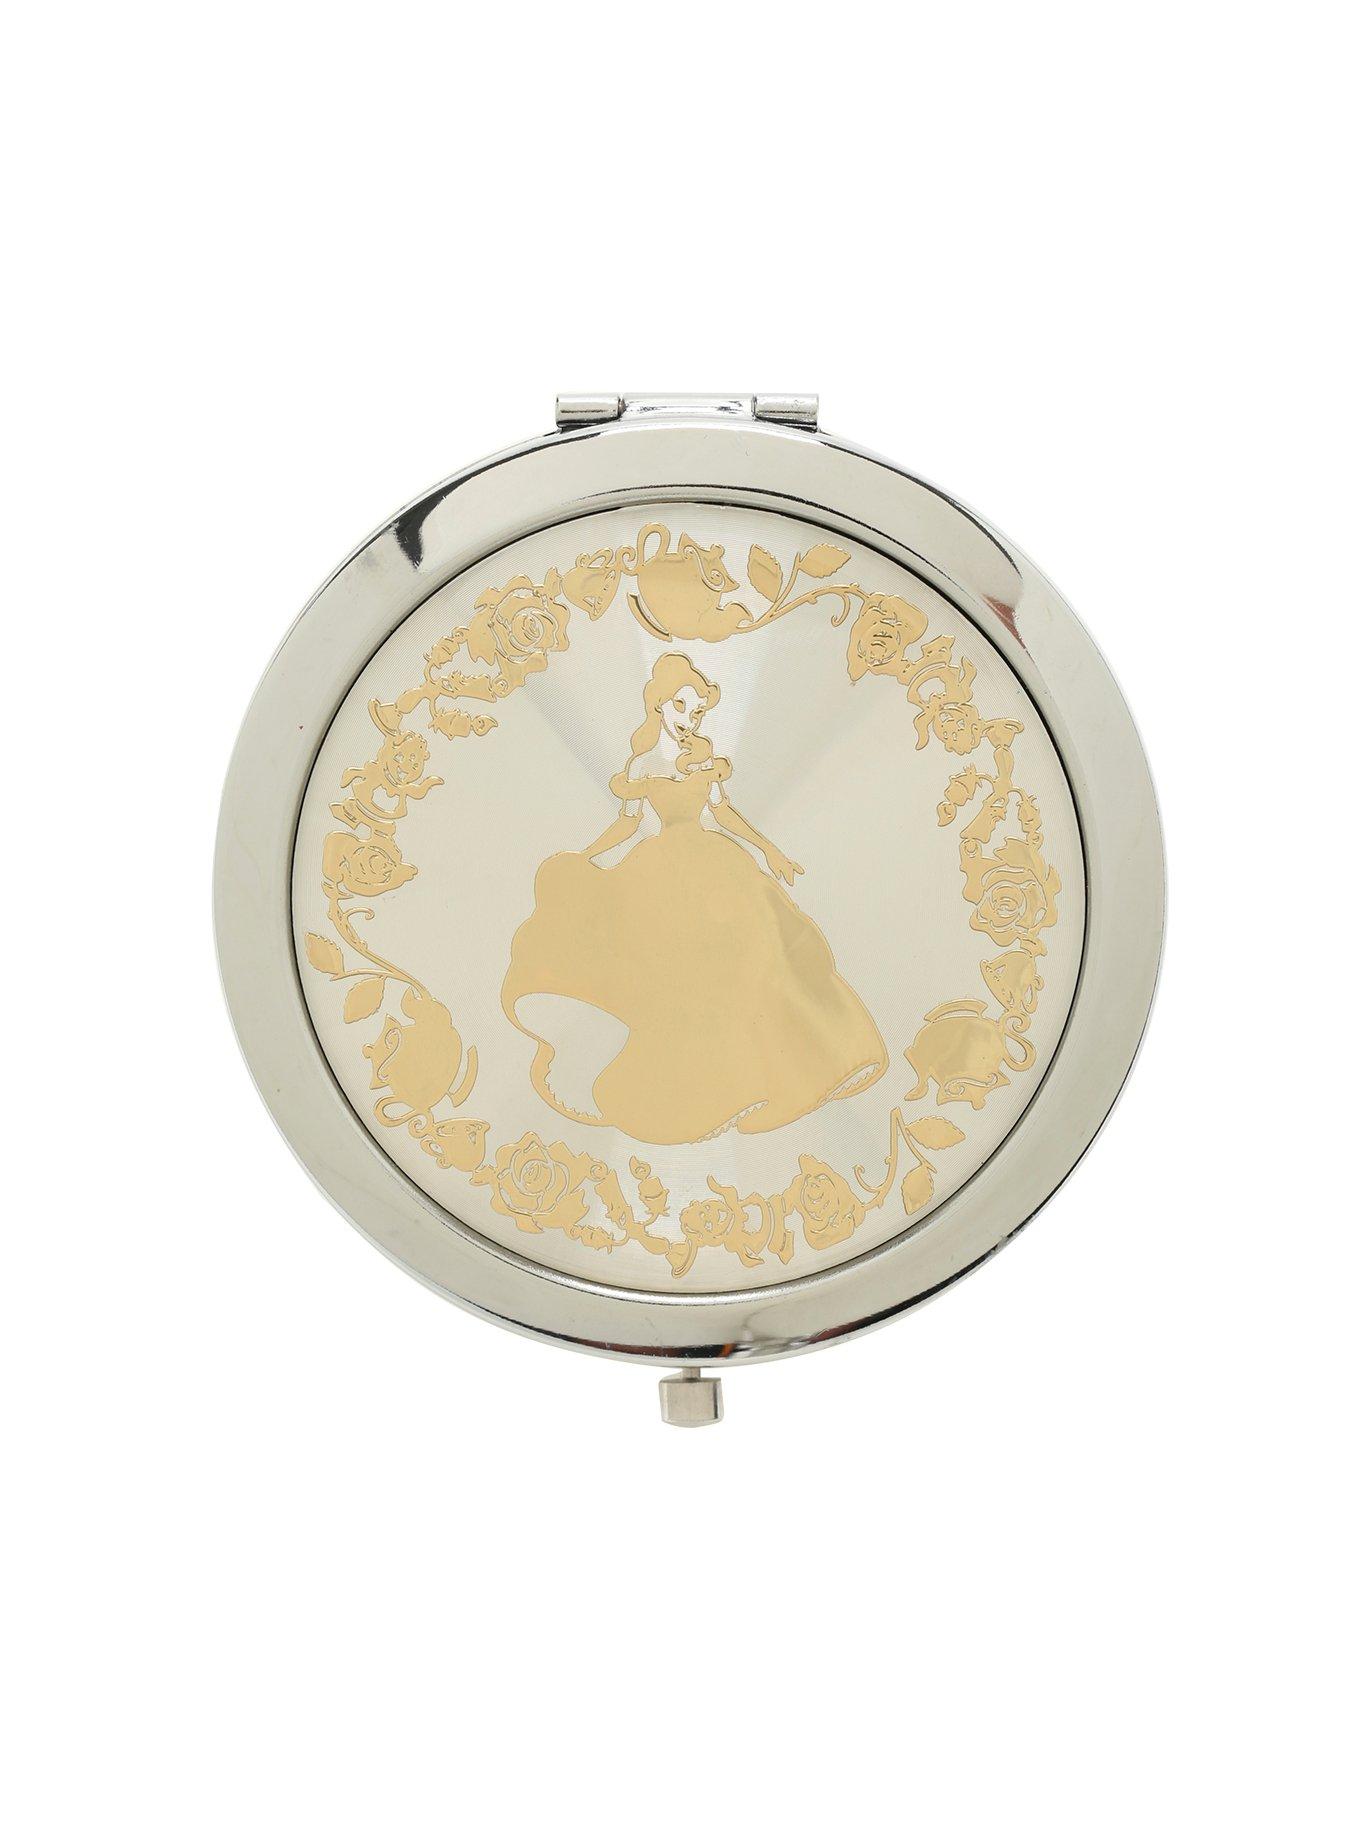 Disney Beauty And The Beast Gold Foil Mirror | Hot Topic